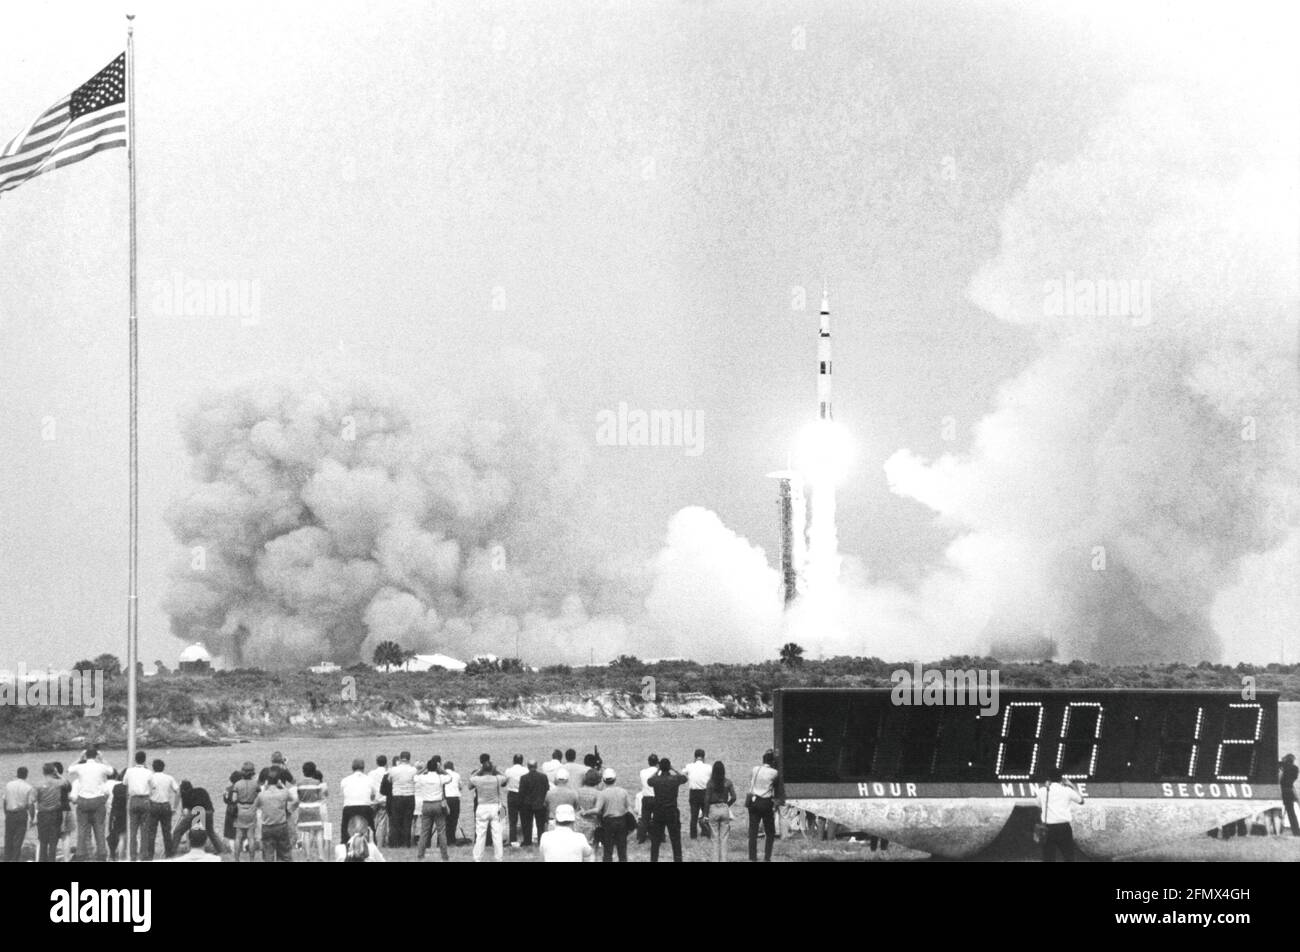 astronautics, mission, Apollo 13, launch of skyrocket type Saturn V, 1970, 1970s, 70s, 20th century, ADDITIONAL-RIGHTS-CLEARANCE-INFO-NOT-AVAILABLE Stock Photo